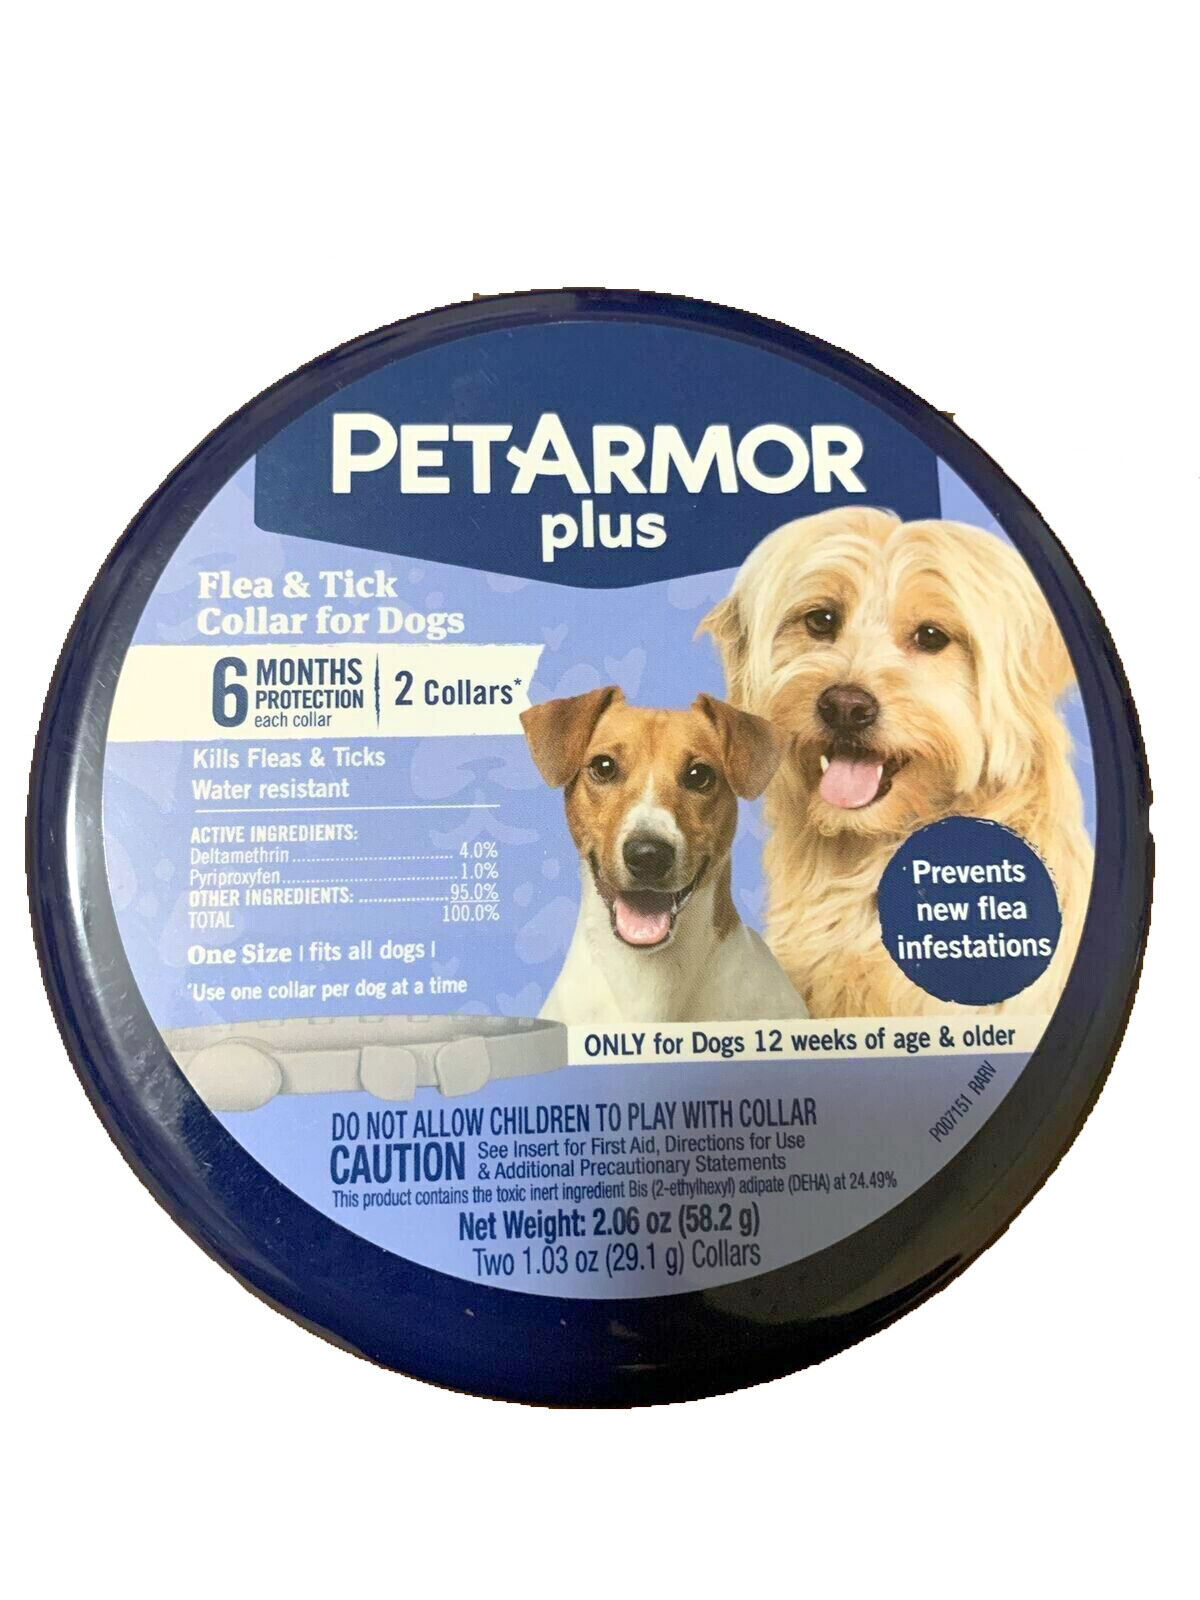 PET ARMOR PLUS 2 Collars - 6 Months Each Flea & Tick Protection for Dogs 